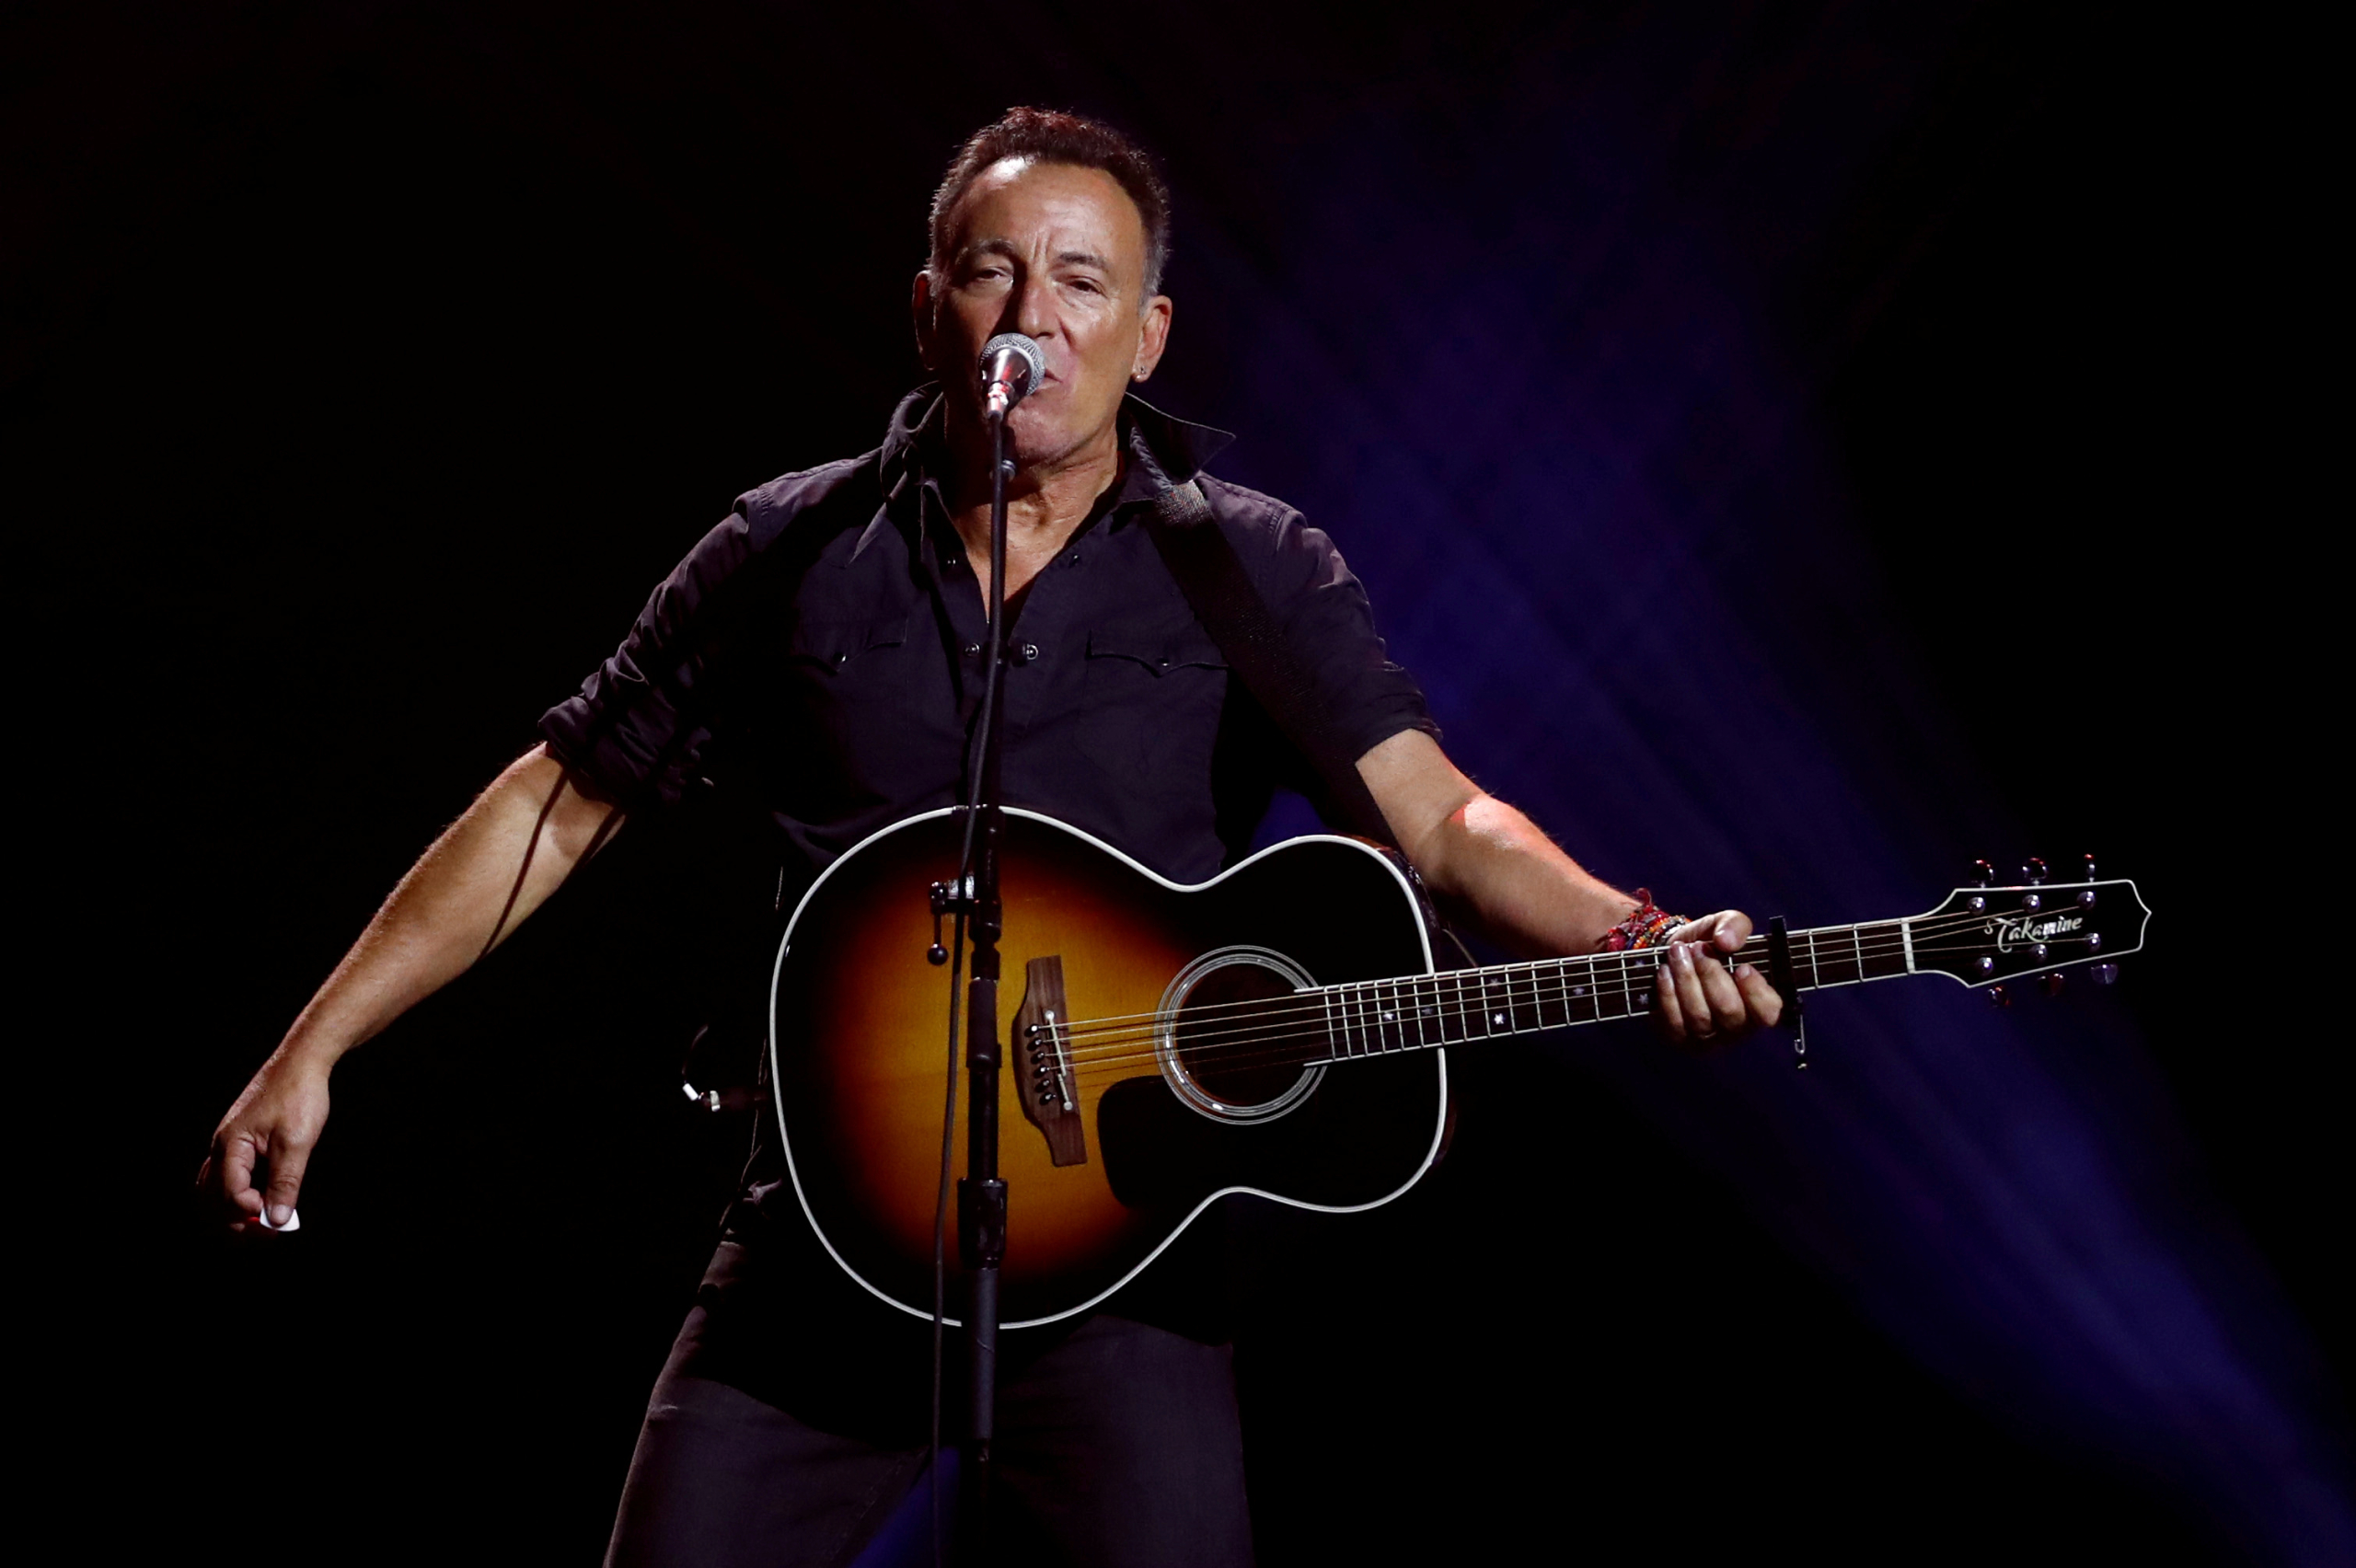 PODCAST – Tuesday, July 12: Bruce Springsteen’s Coming To CT; Rock Photographer Neil Zlozower; Snapping Rubber Bands On AJ’s Forehead